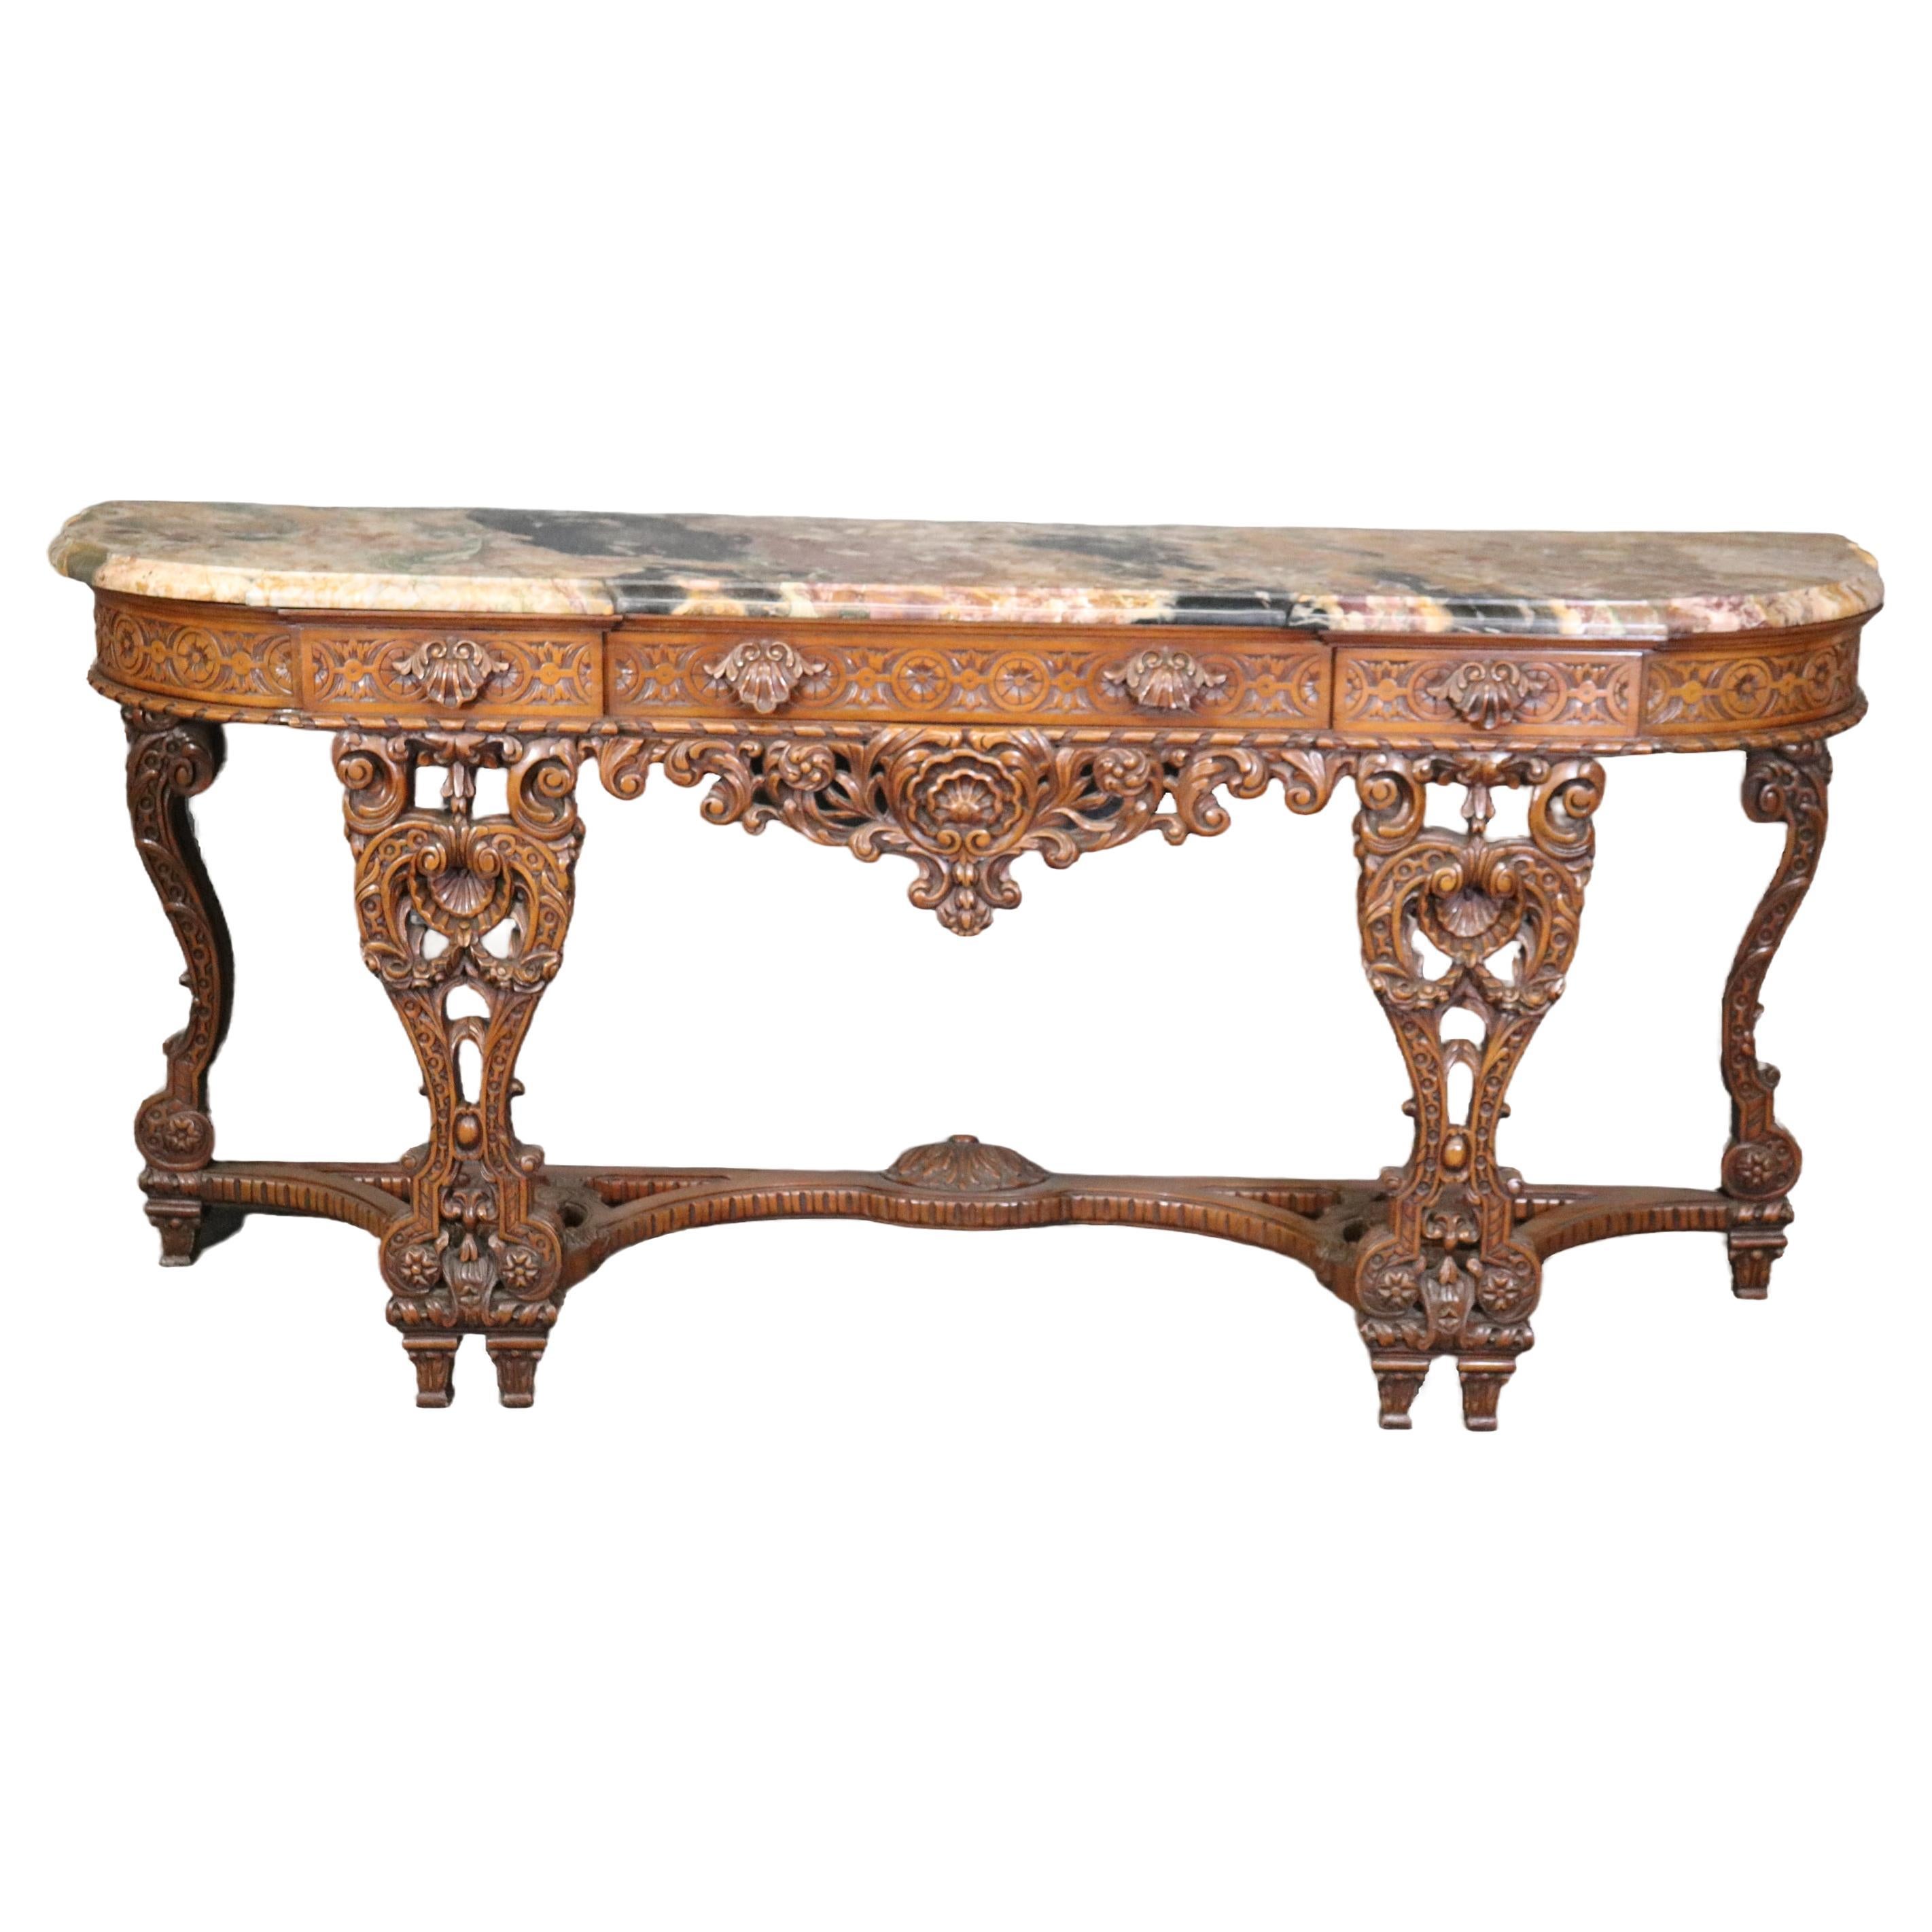 Massive Breccia Vendome Marble Top French Louis XIV Style Walnut Sideboard  For Sale